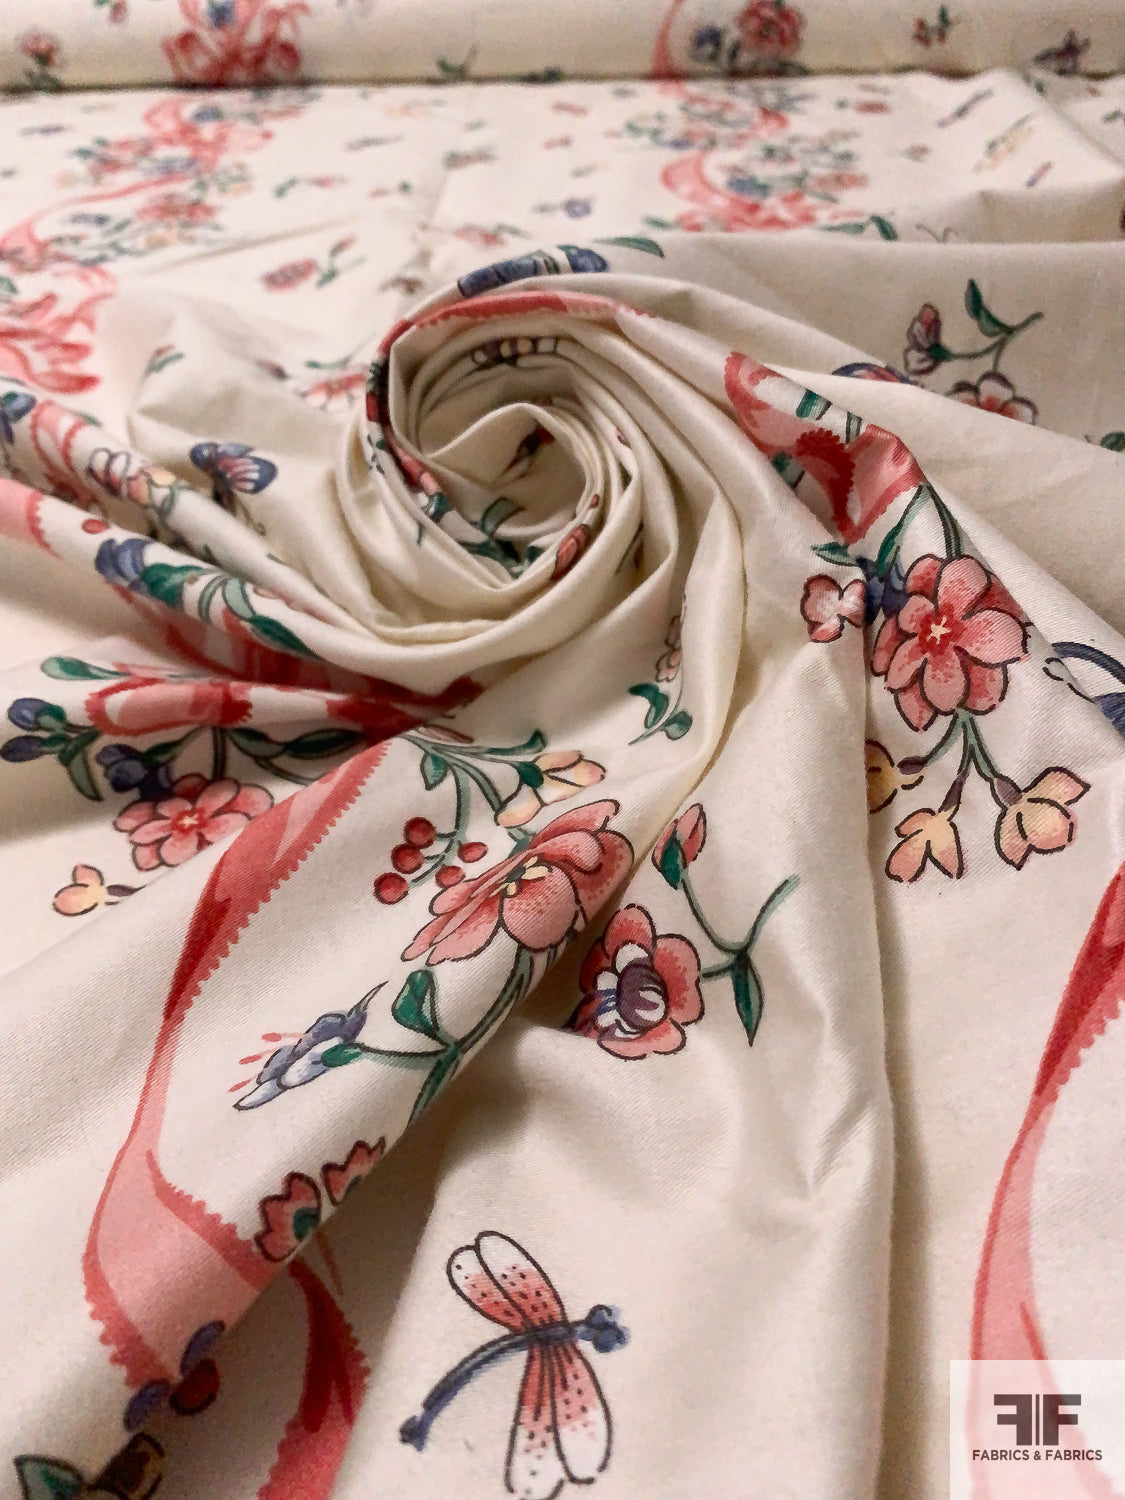 Trailing Floral Ribbon Printed Fine Cotton Twill - Light Biege / Dusty Coral / Green / Soft Blue